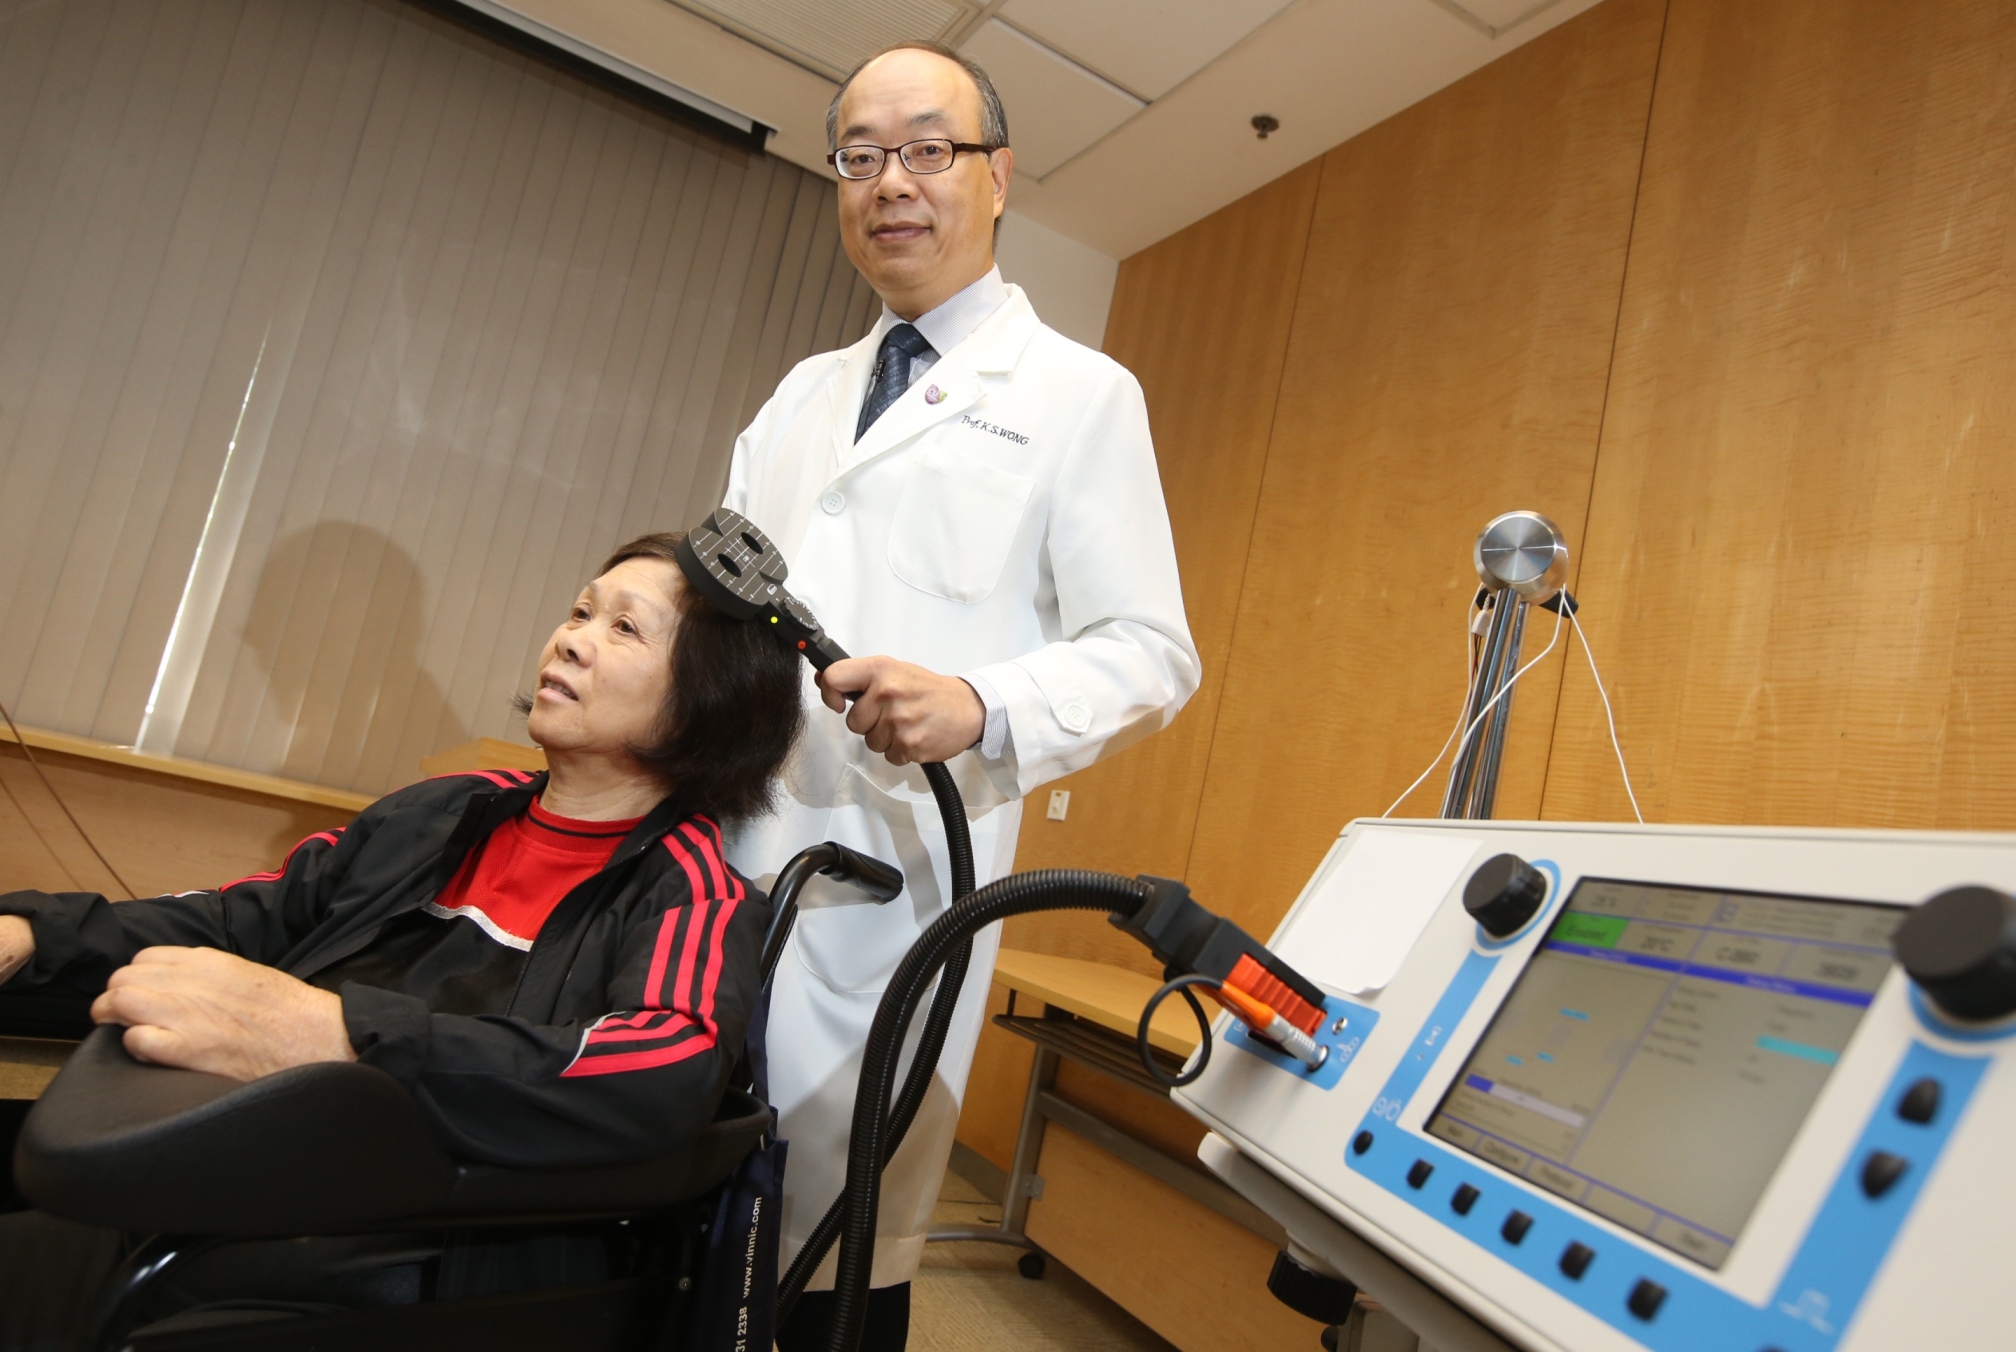 Prof. Lawrence Ka Sing WONG and his team invent ‘Pulse-Magnetic-Stimulation (PMS)’, the world’s first 3-in-1 therapy combining physiotherapy, external counterpulsation and ‘Intermittent theta burst magnetic stimulation’ to repair damaged brain after stroke and enhance function recovery. 